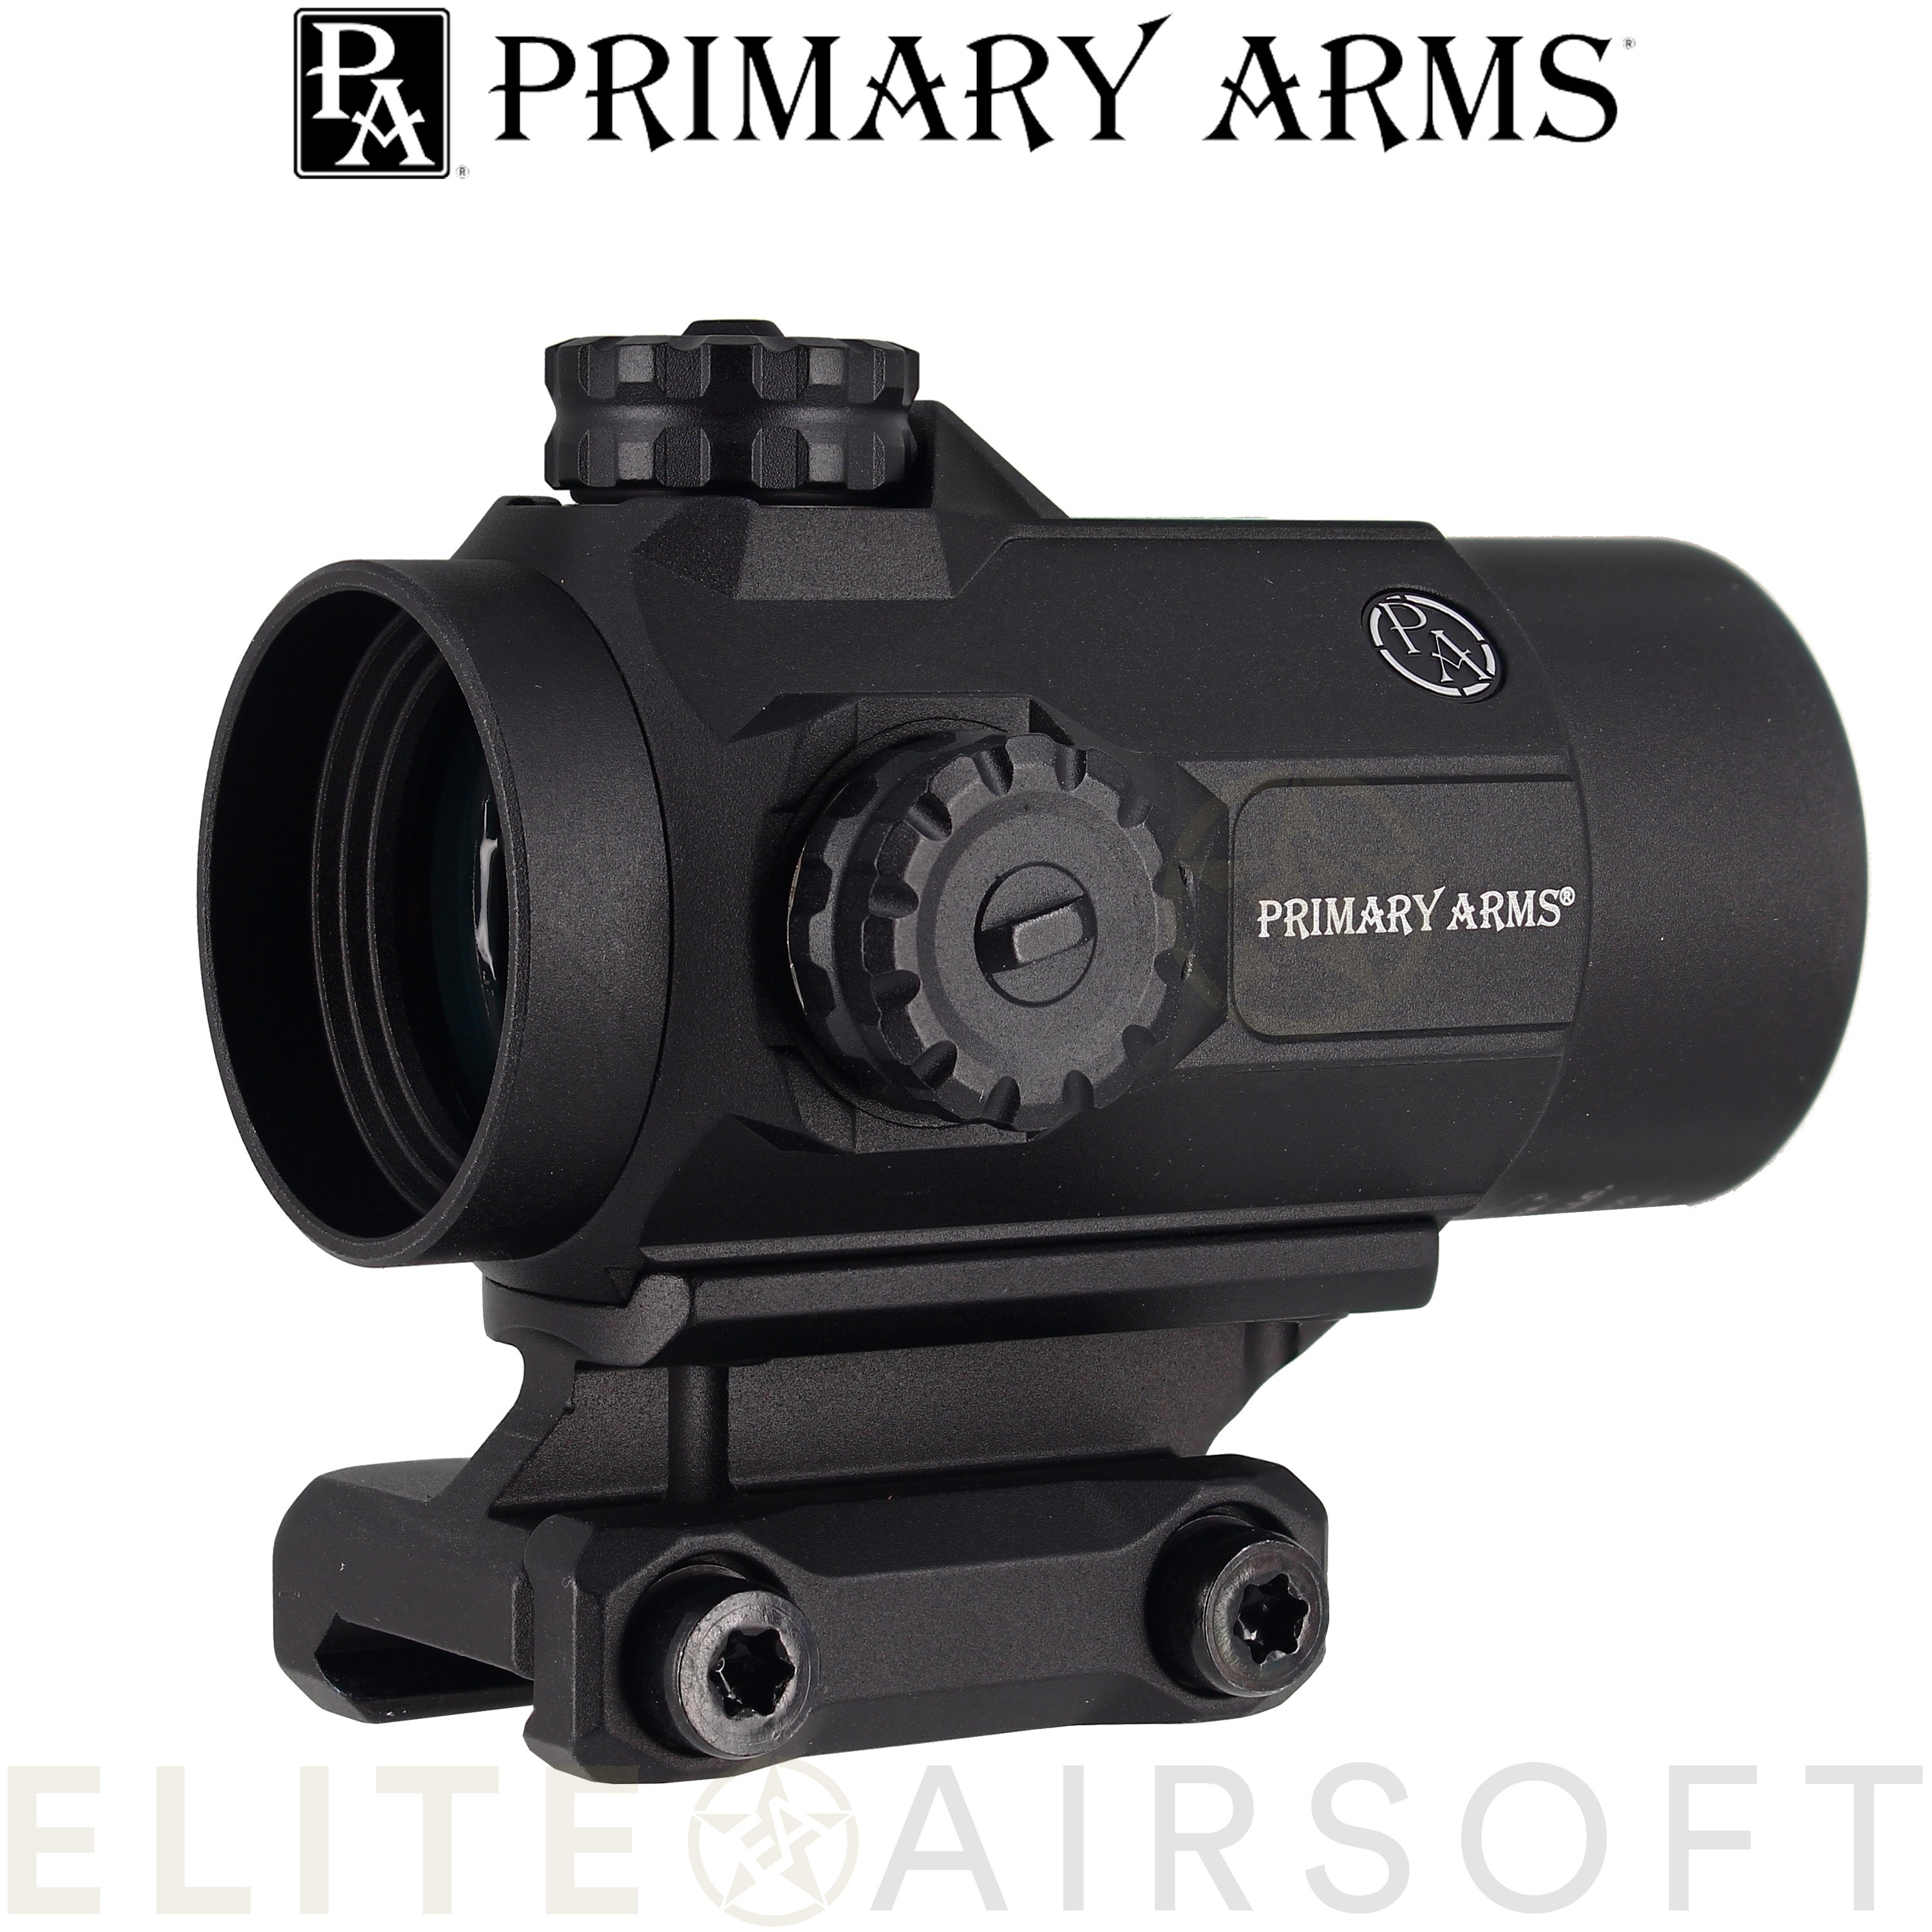 Primary Arms - Viseur SLX-MD-25 Rotary 2 MOA